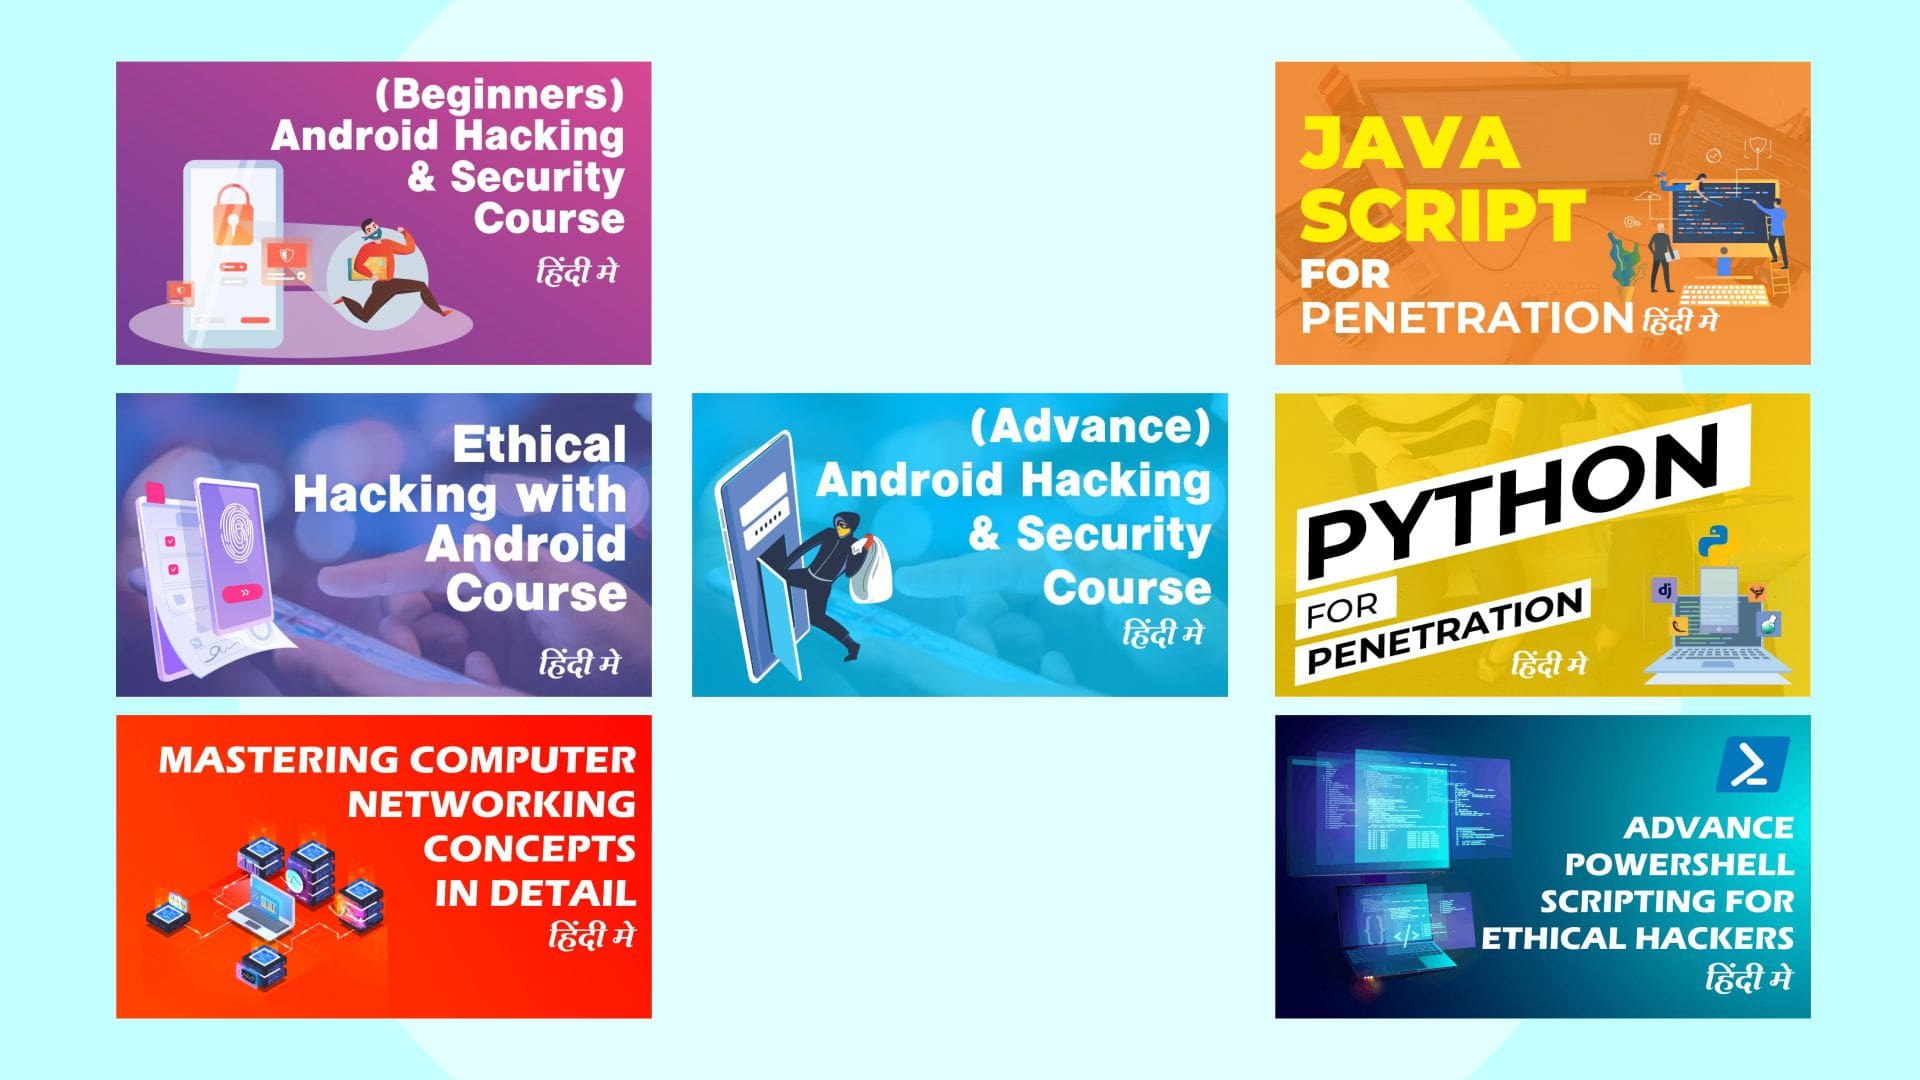 Hacking With Android + (Beginners) Android Hacking + (Advance) Android Hacking + JavaScript + Python + Networking + Powershell Scripting 